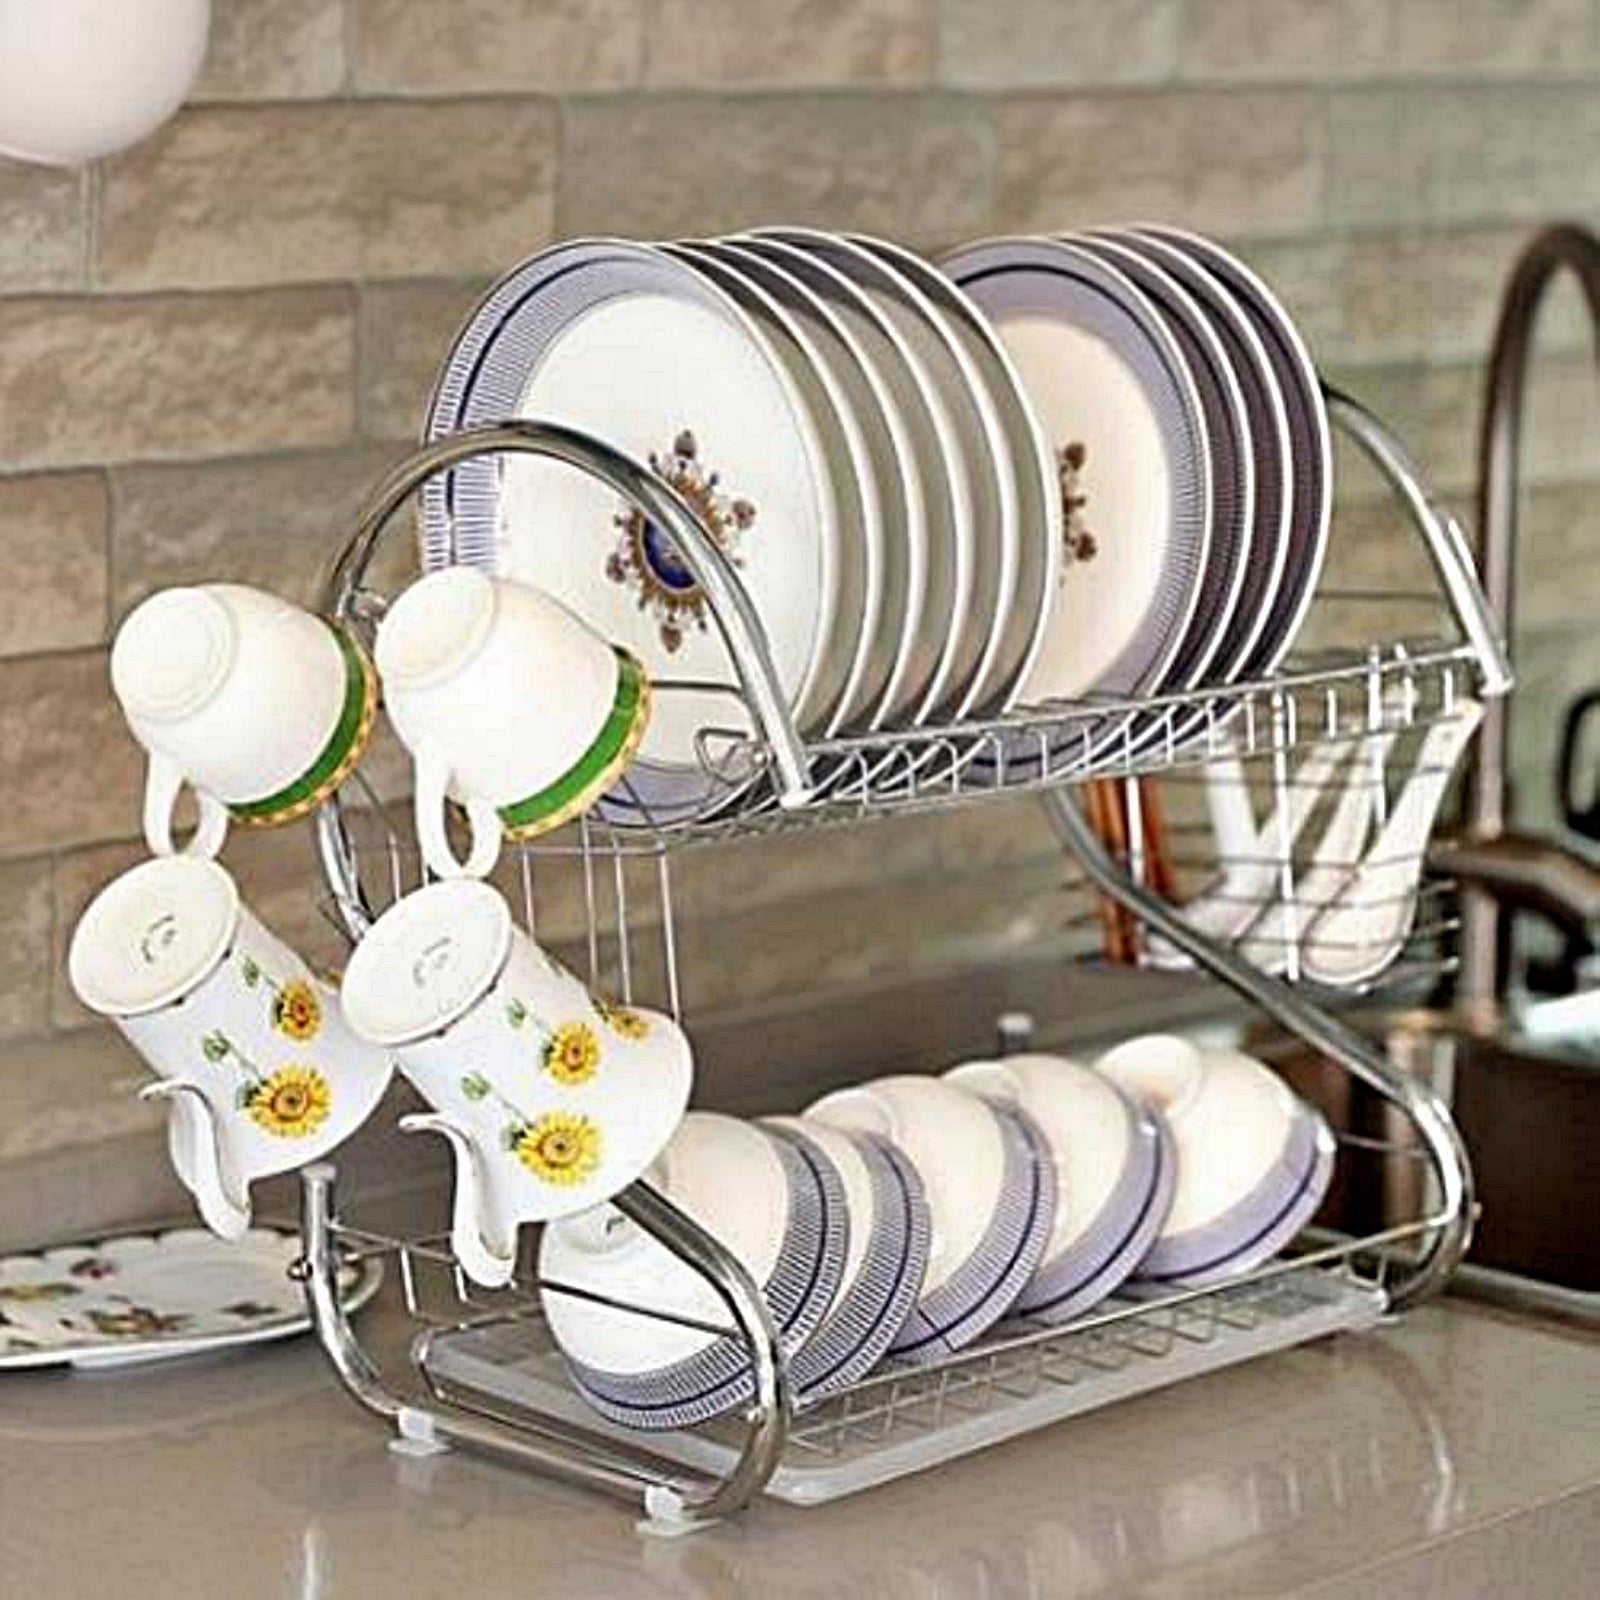 2-Layer Stainless Steel Kitchen Dish Rack Cup Holder Cutlery Drainer - Homeware Discounts